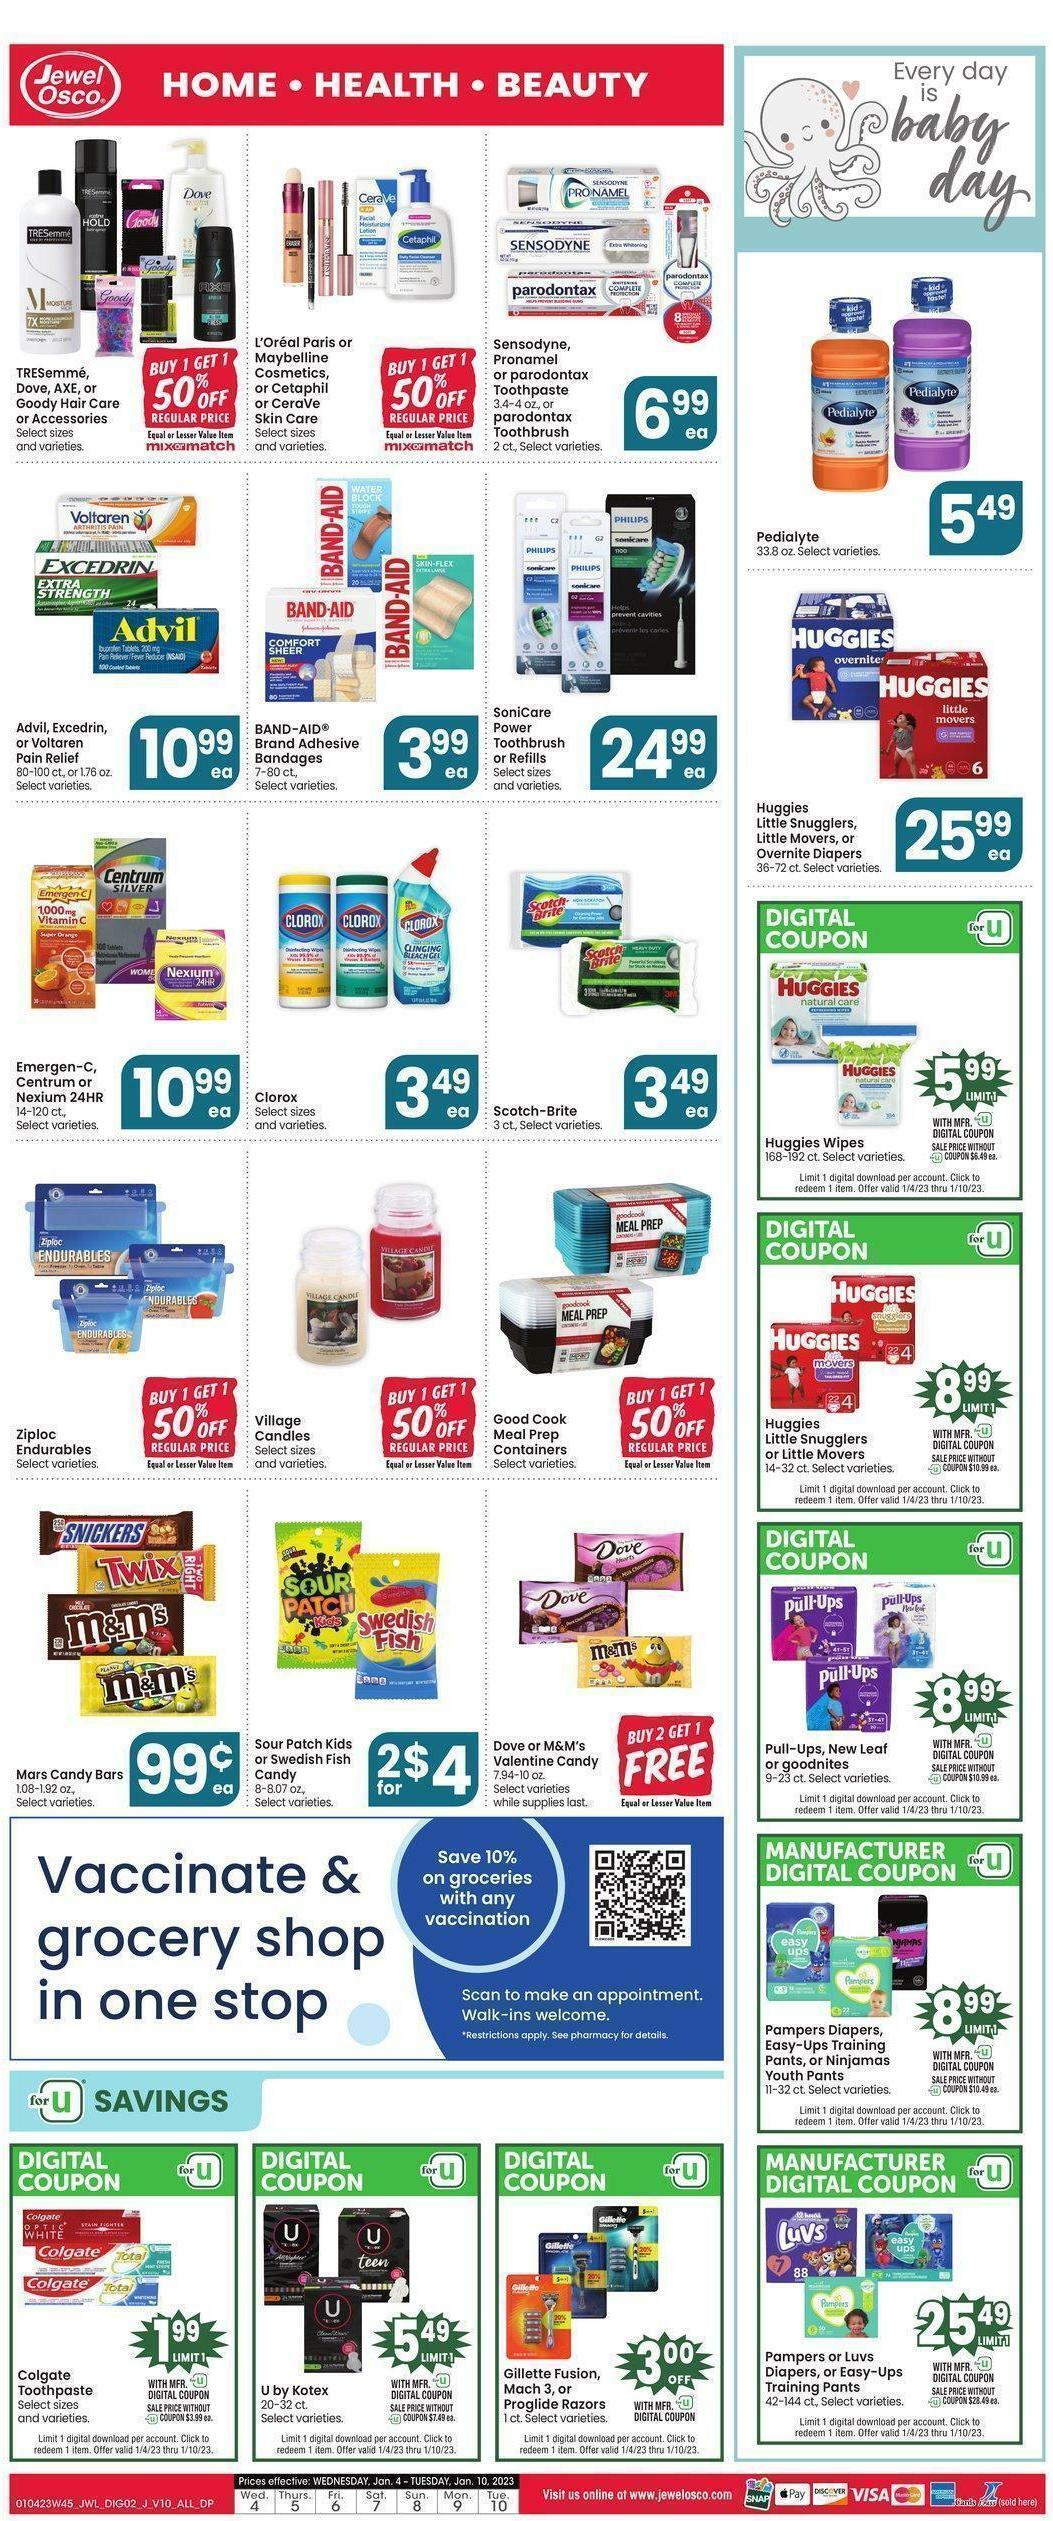 Jewel Osco Specialty Guide Weekly Ad from January 4